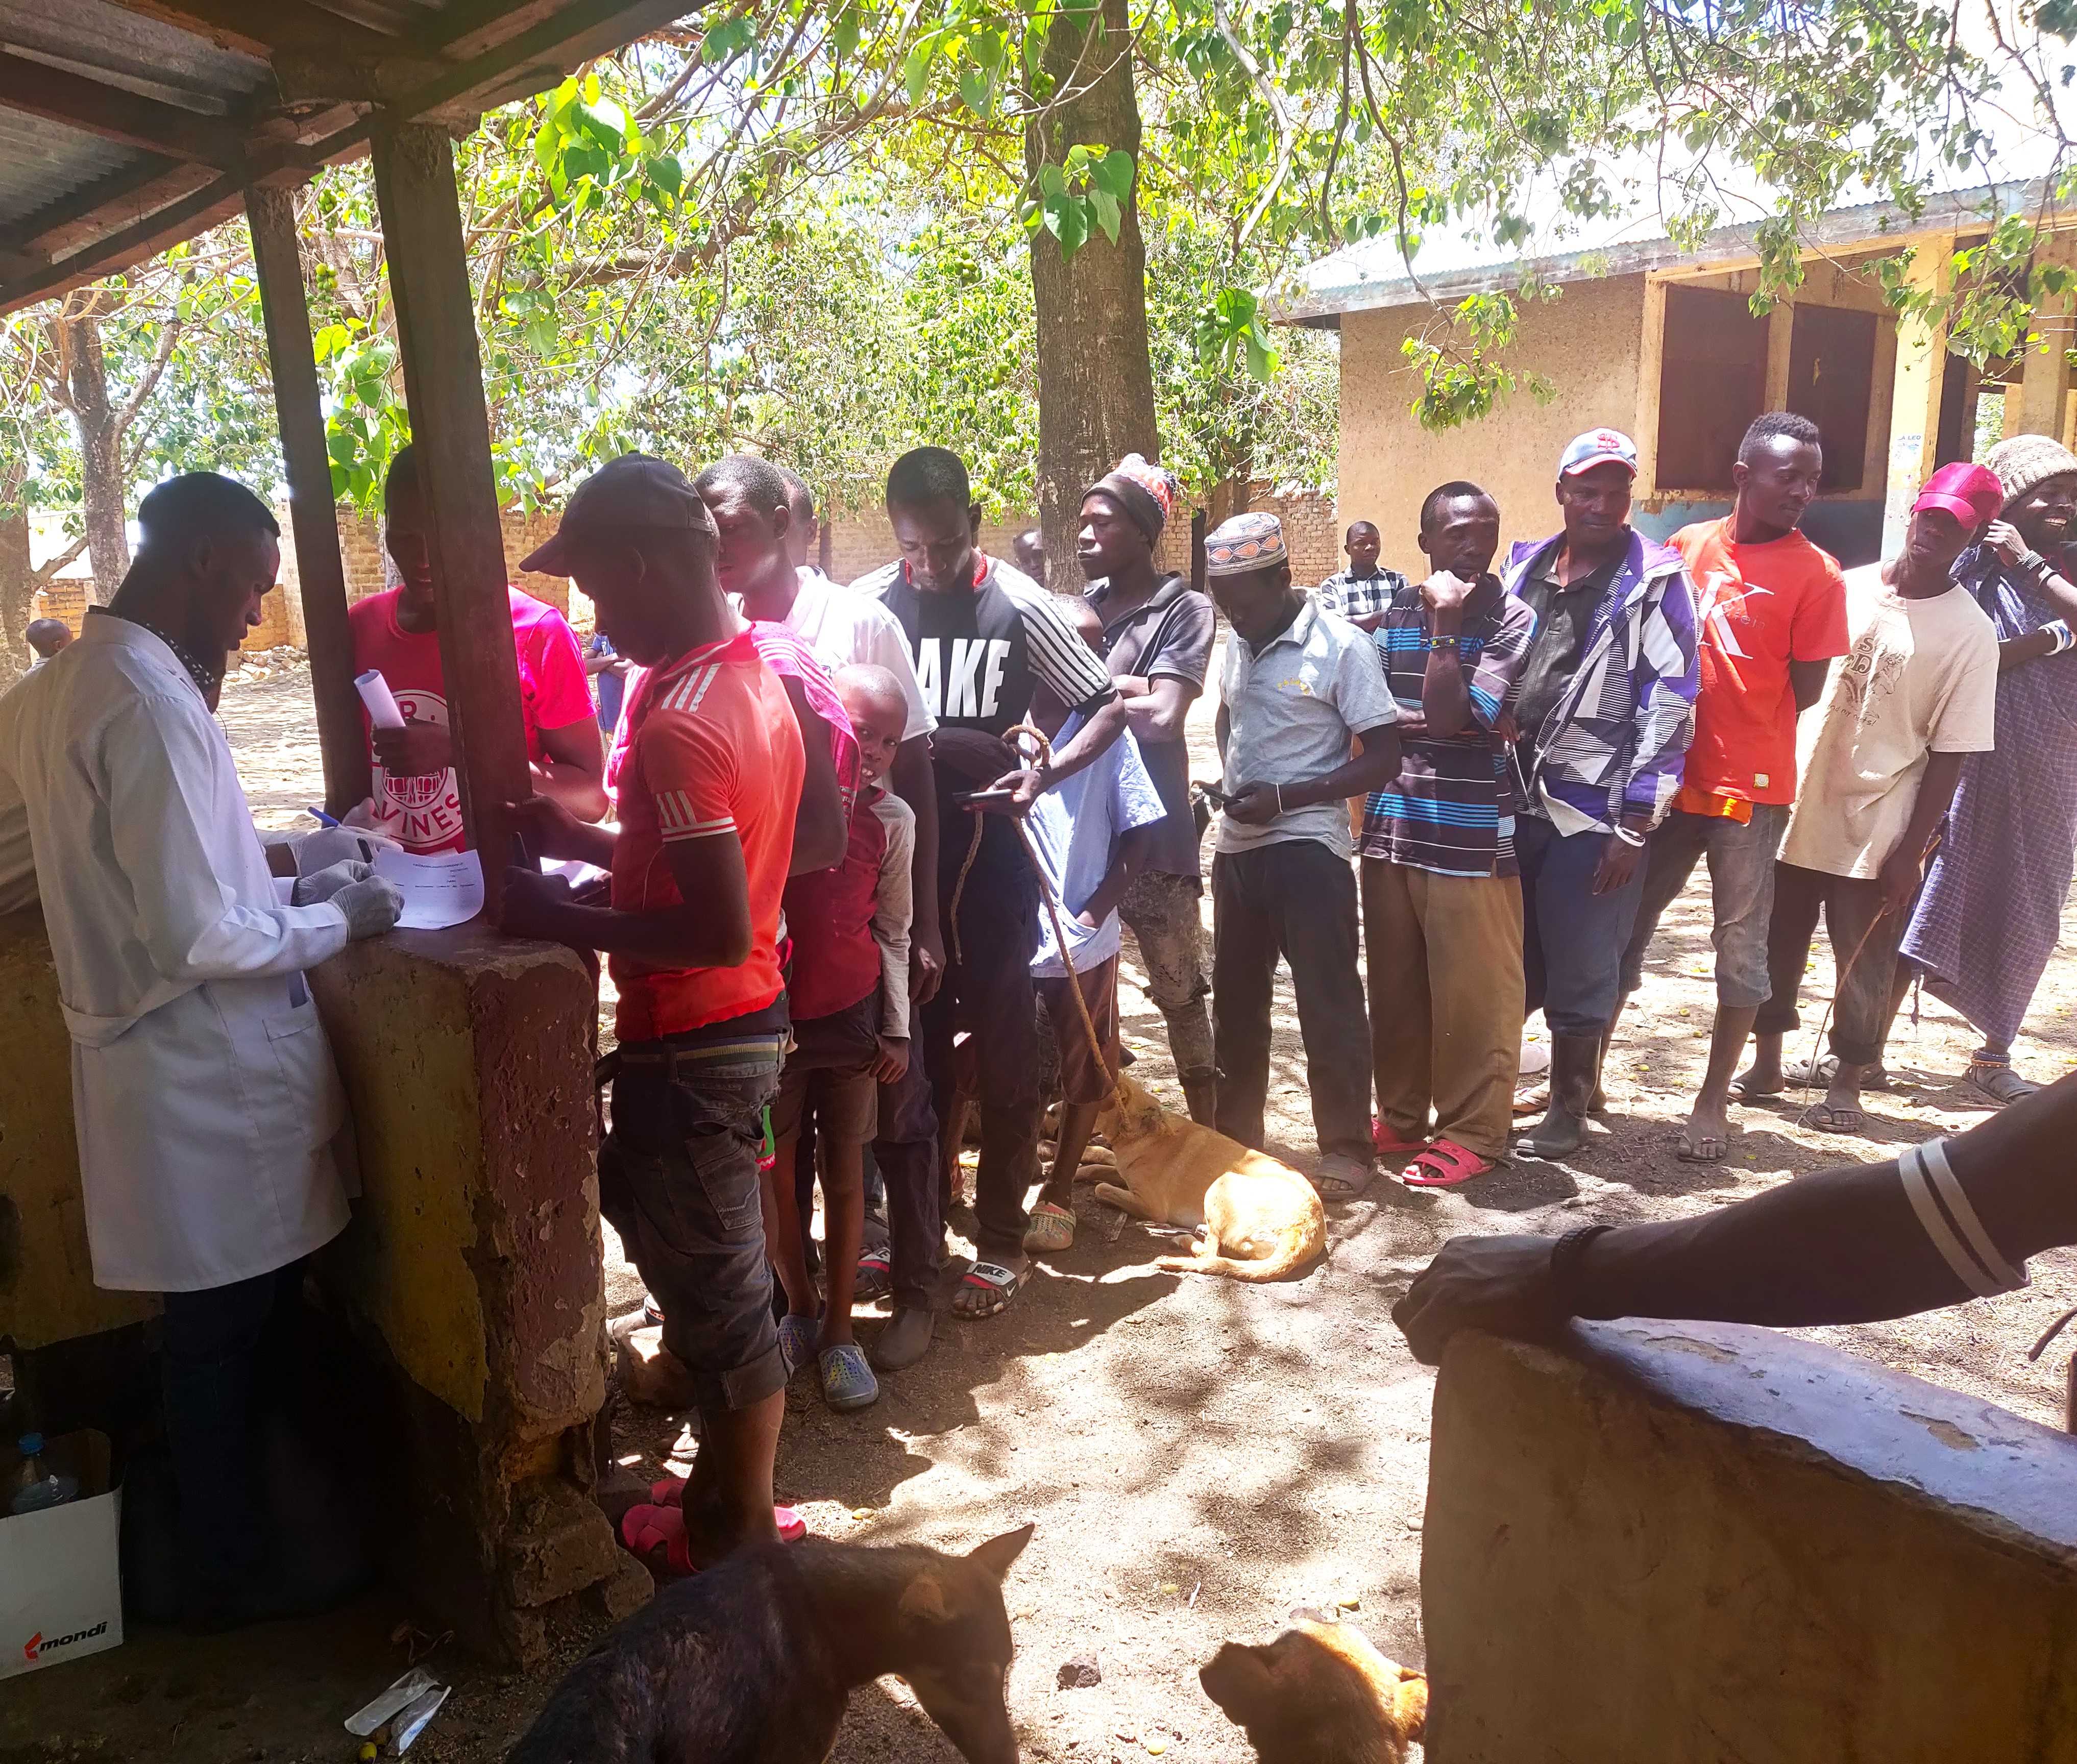 People lining up to have their pet dogs vaccinated against rabies during WRD 2022 in Tanzania